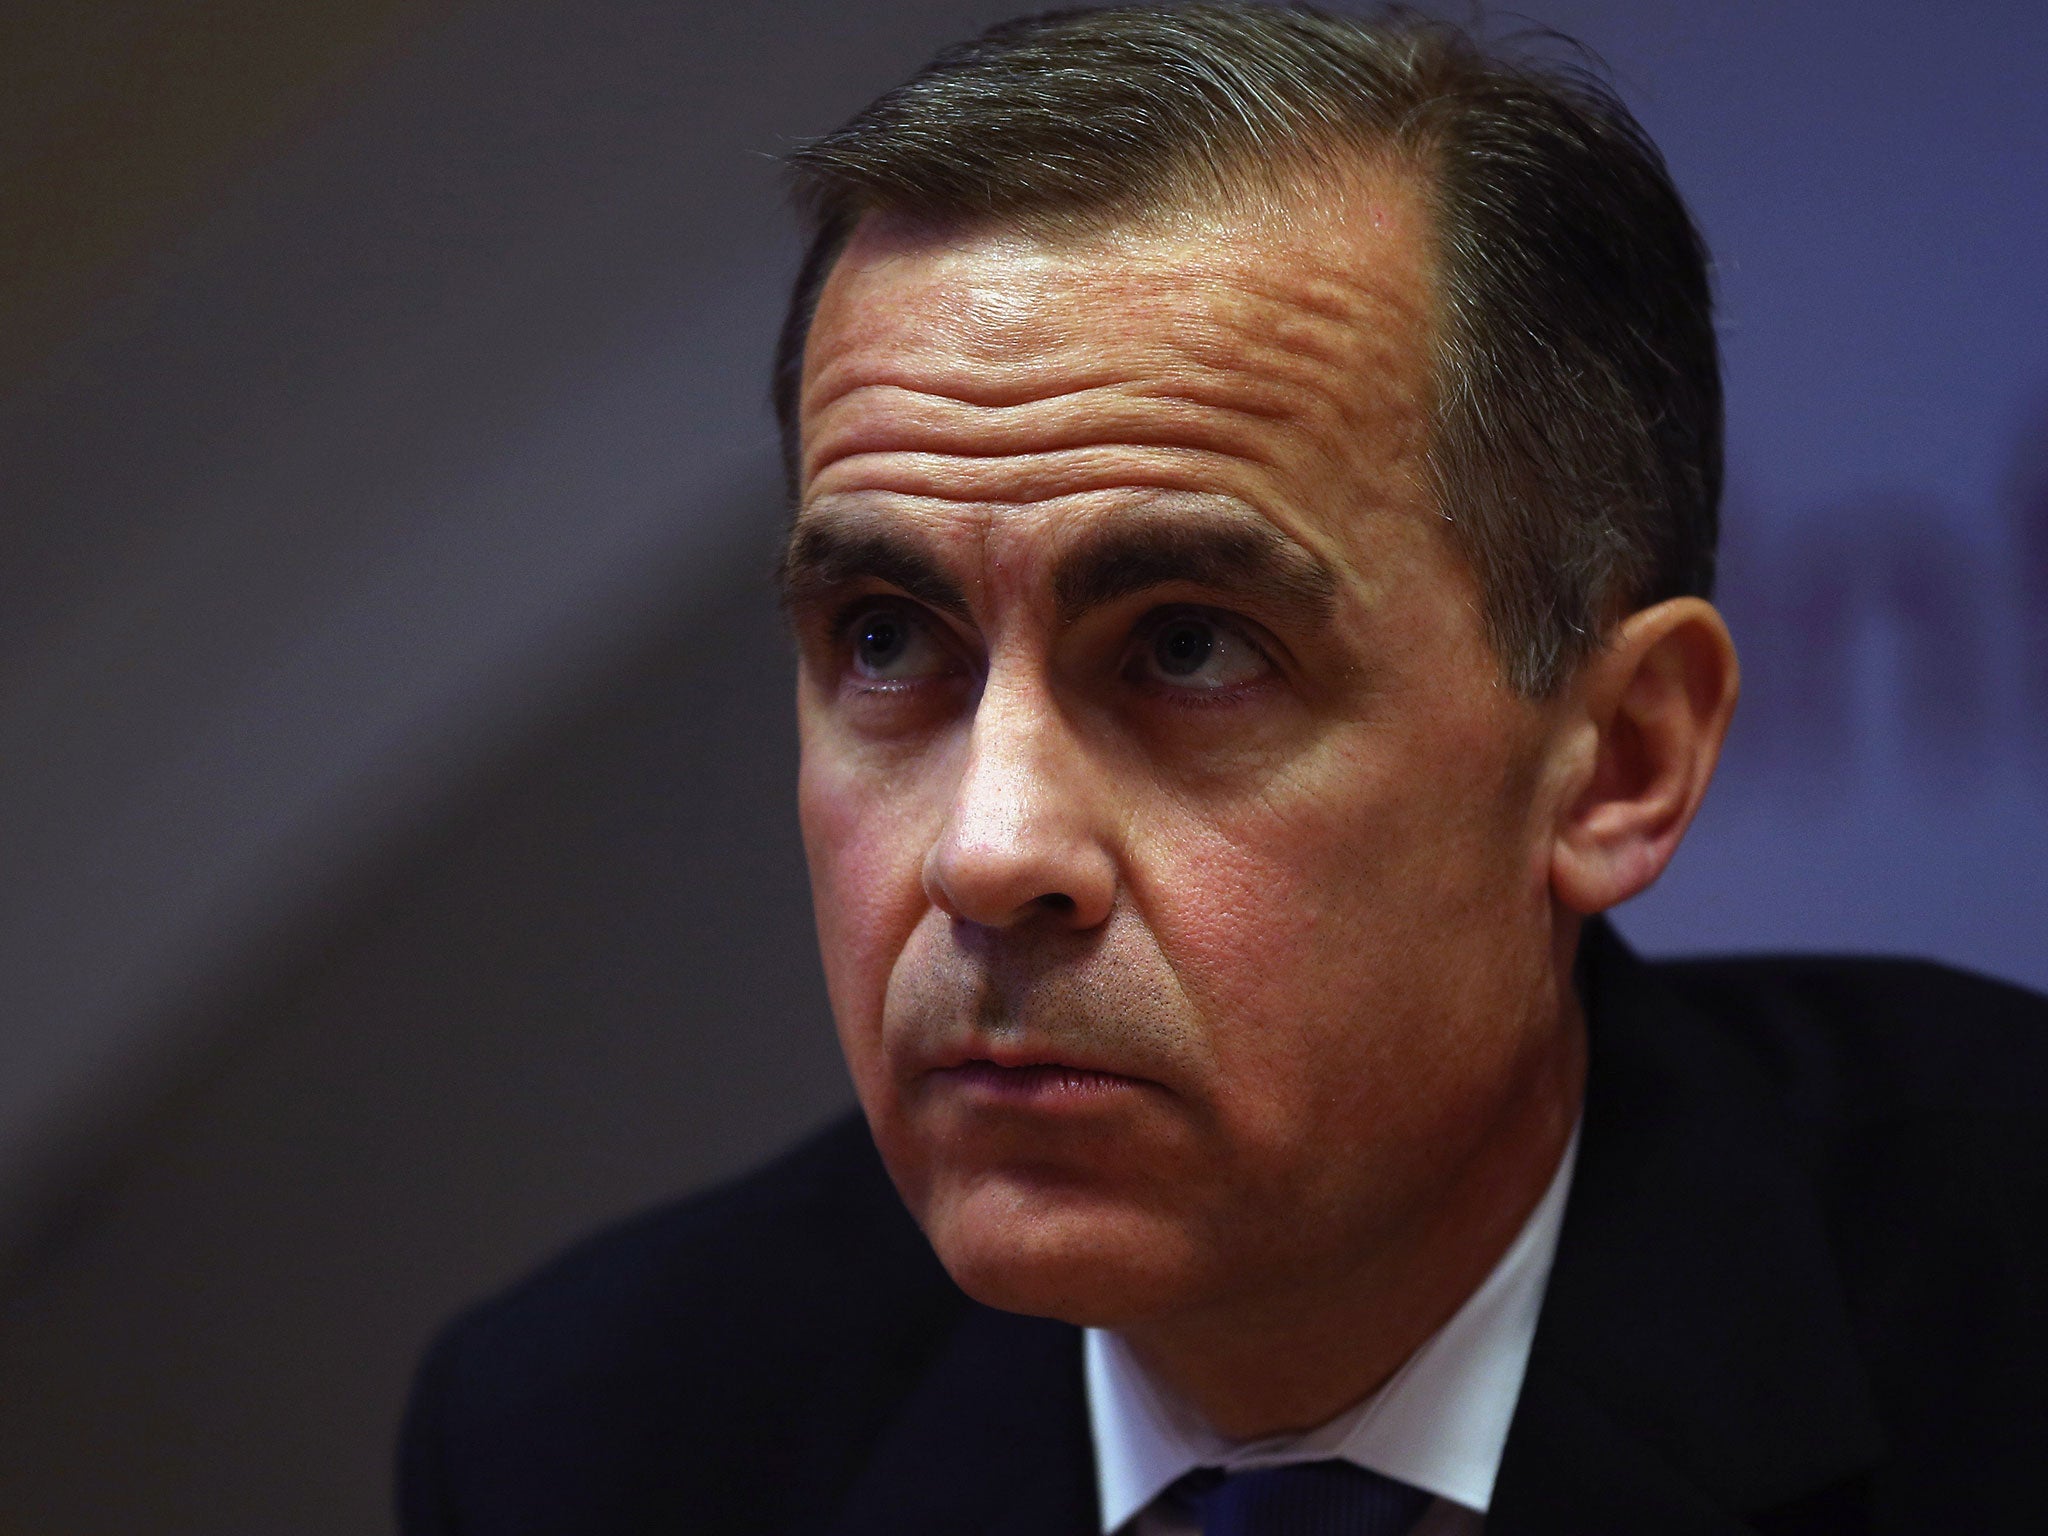 Mark Carney said the current period of low inflation - boosting spending power - was positive for the economy